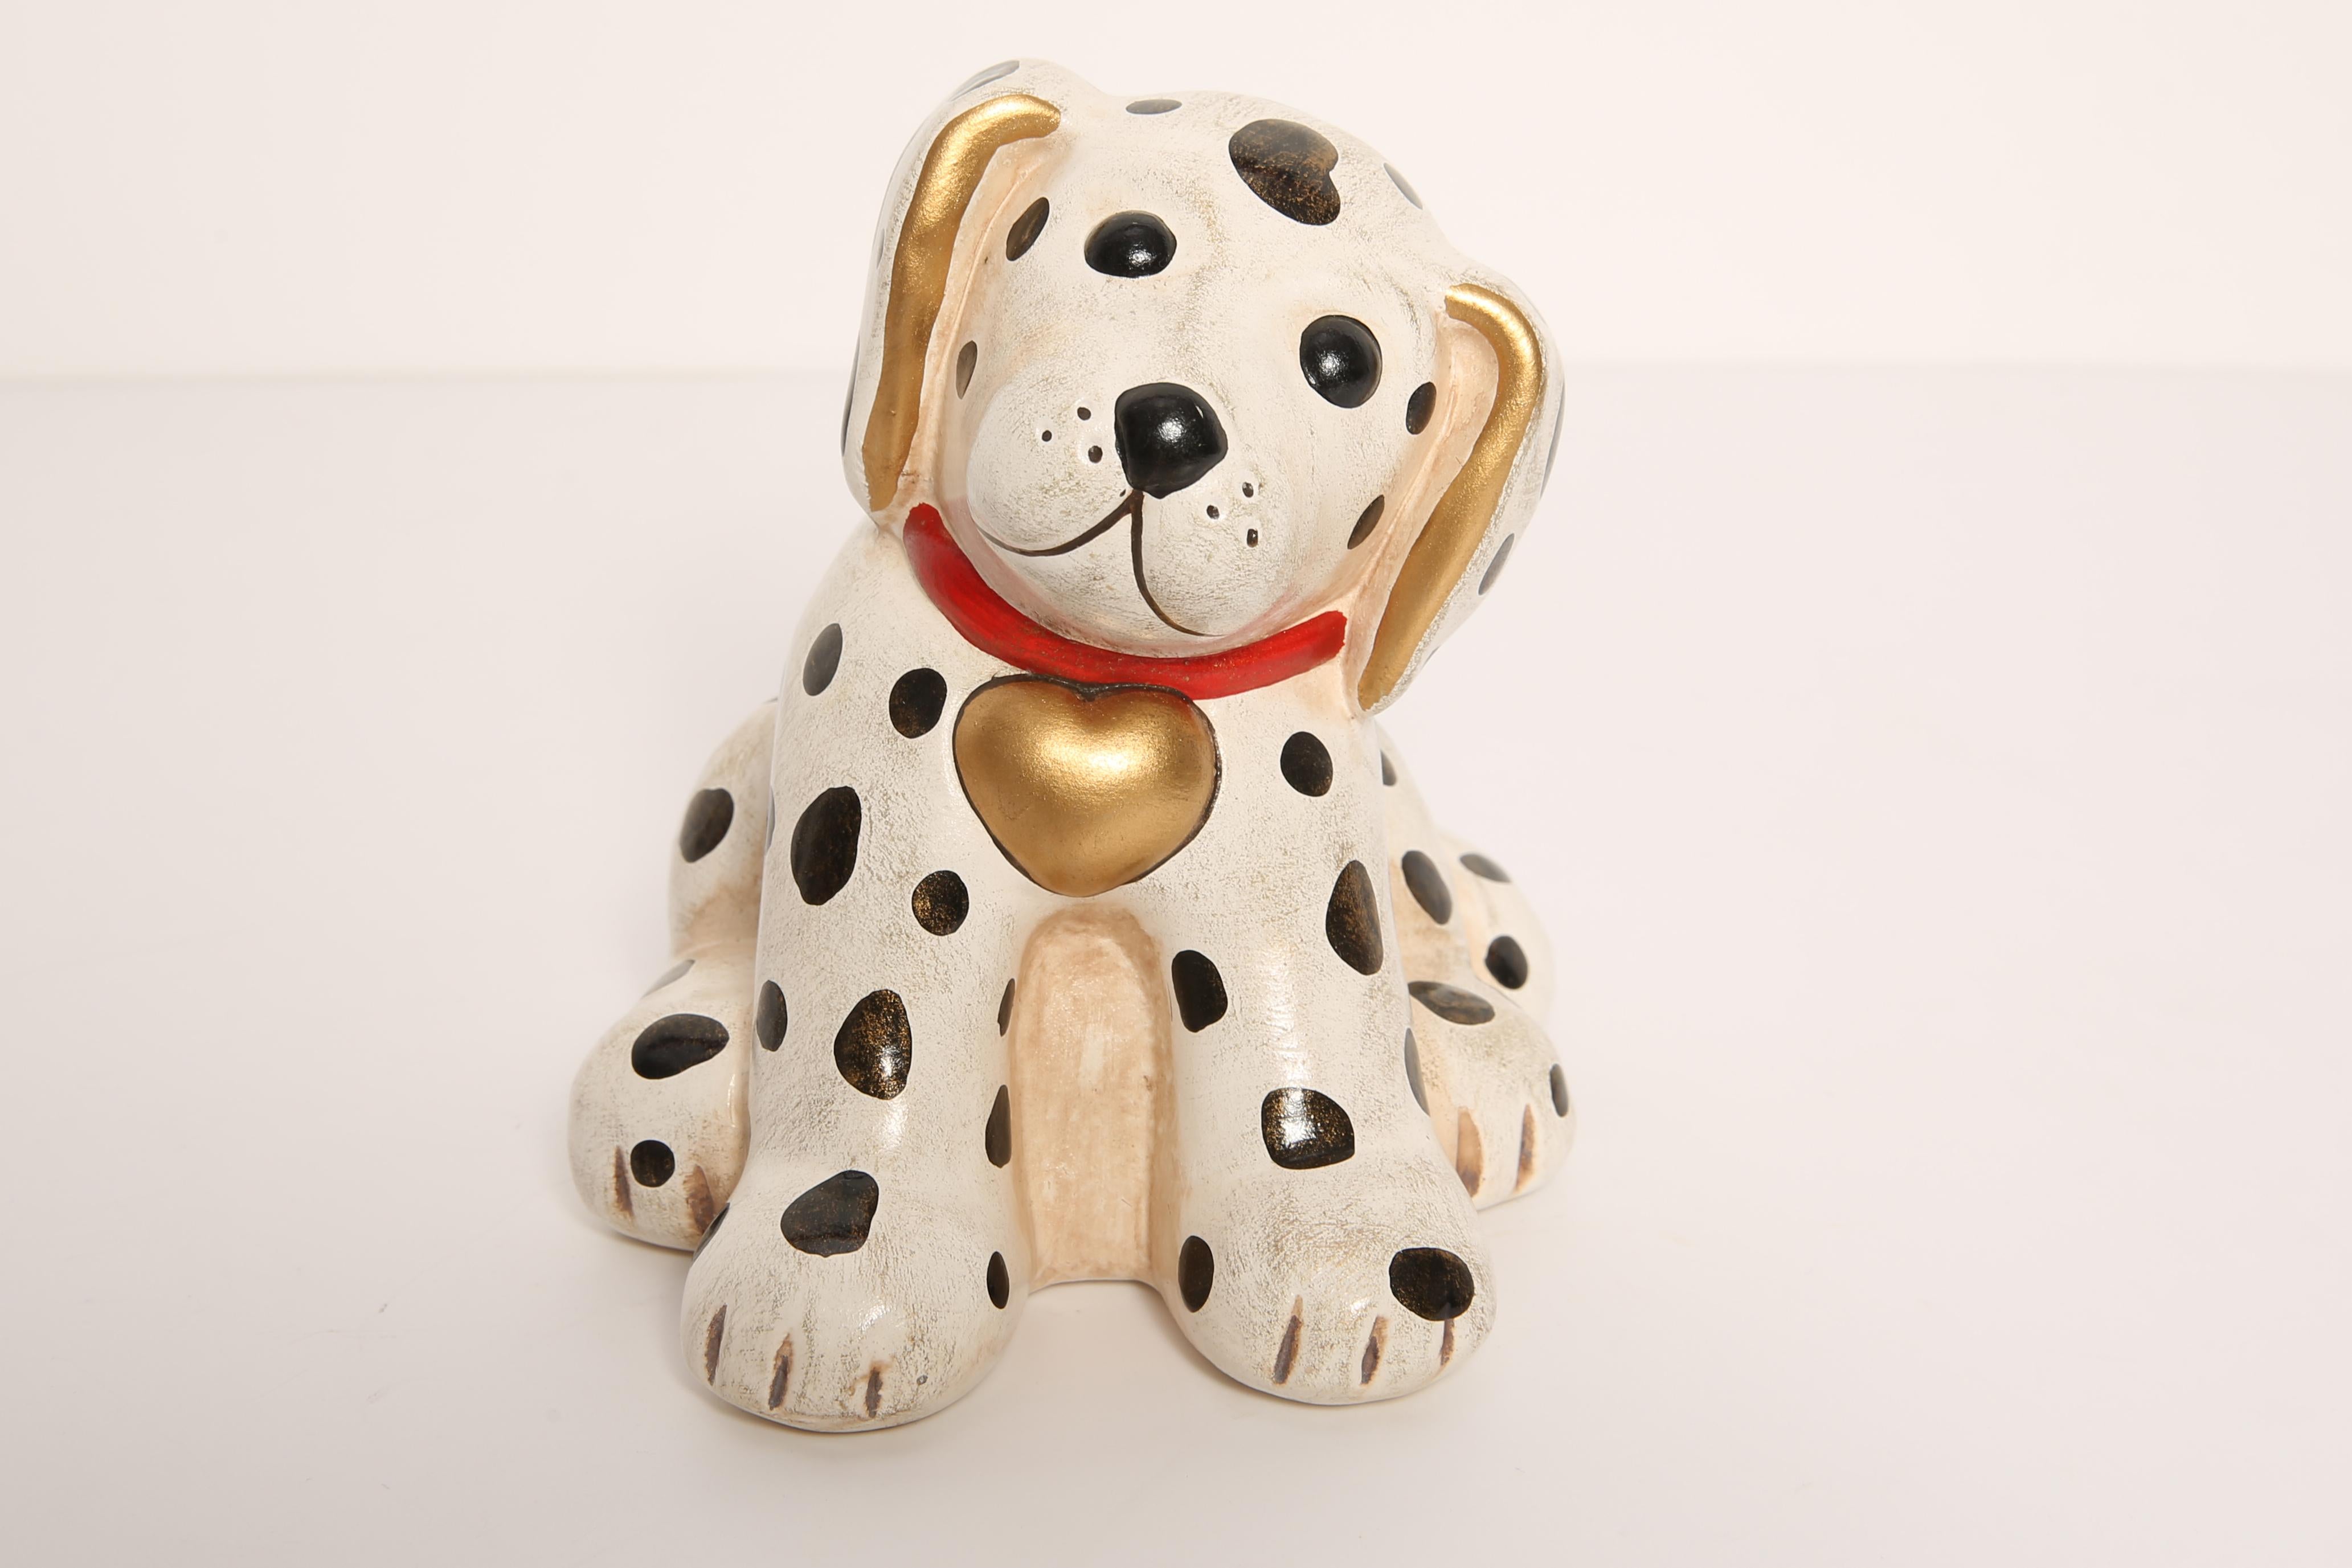 Painted ceramic, good original vintage condition. Beautiful and unique decorative sculpture. Dalmatian Dog Sculpture was produced by Thun factory in Italy.